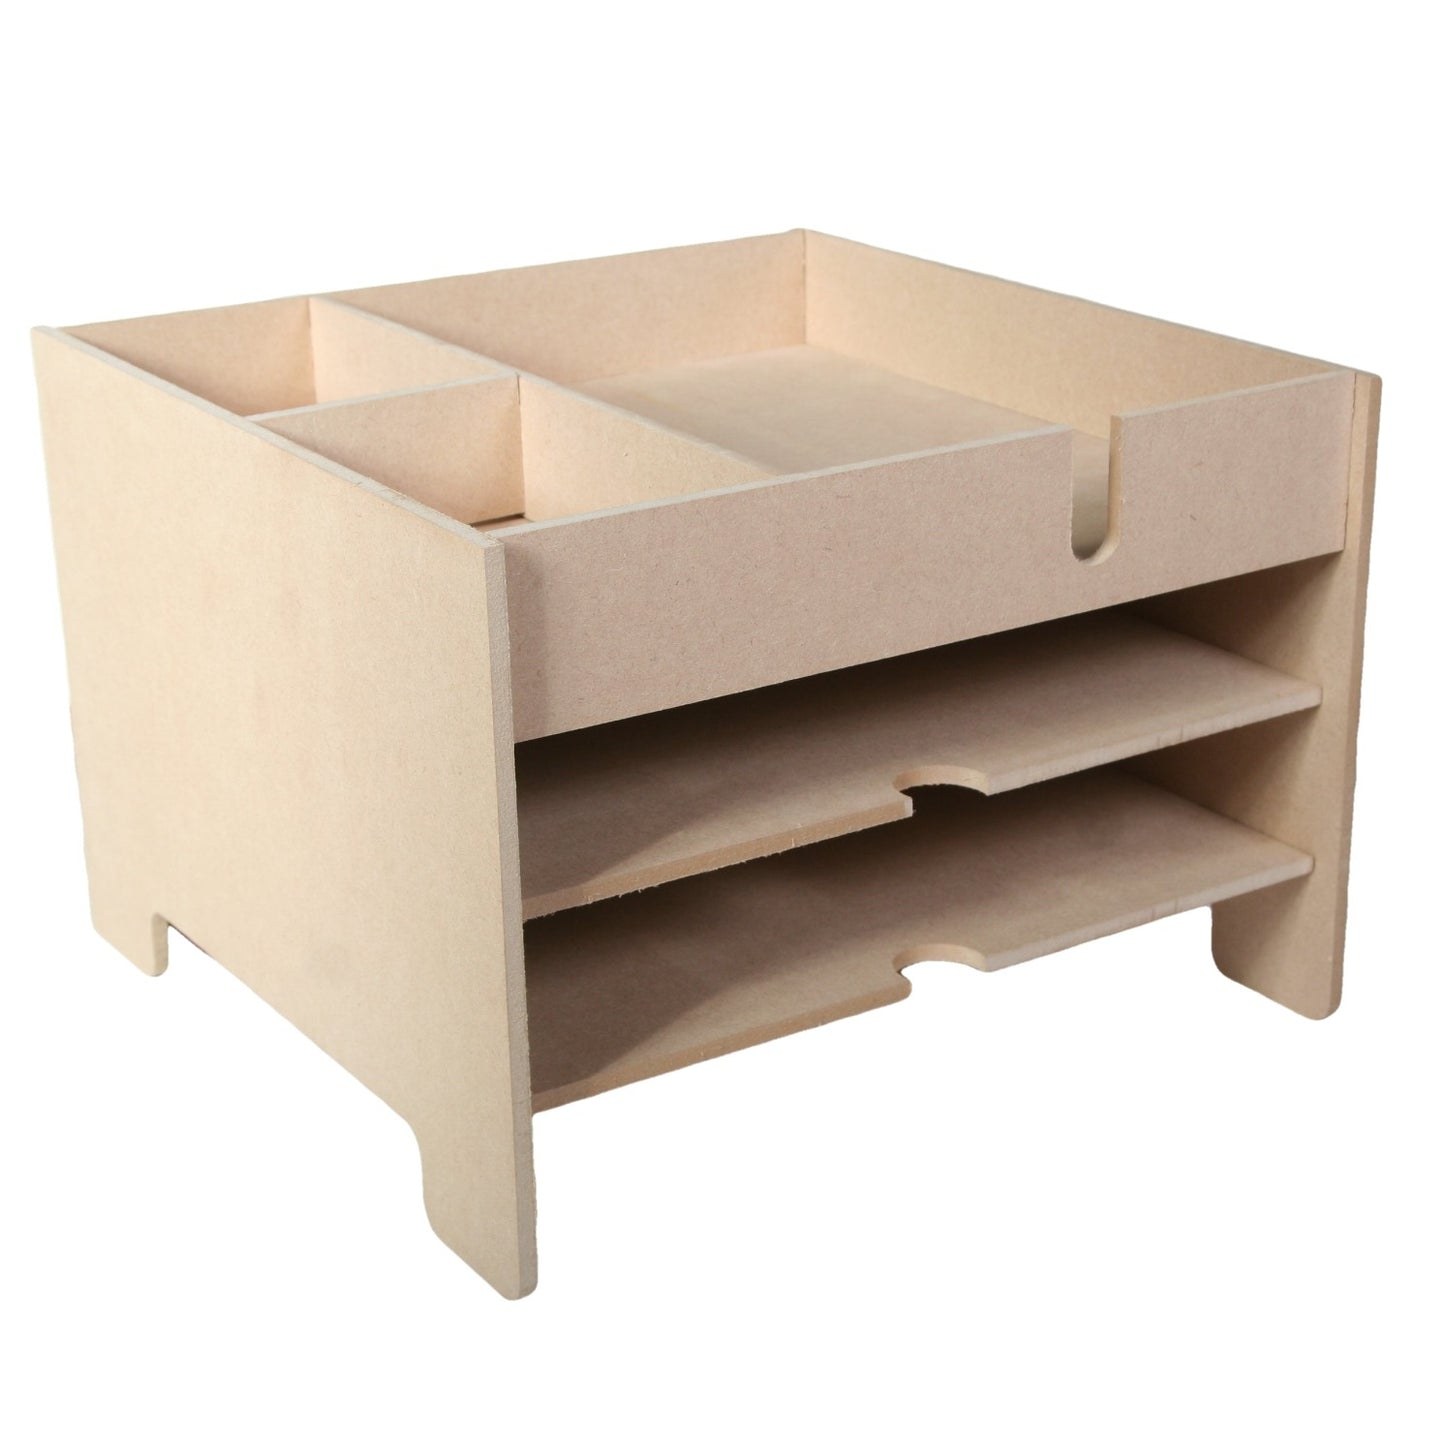 12 x 12 and A4 office desk and craft paper storage